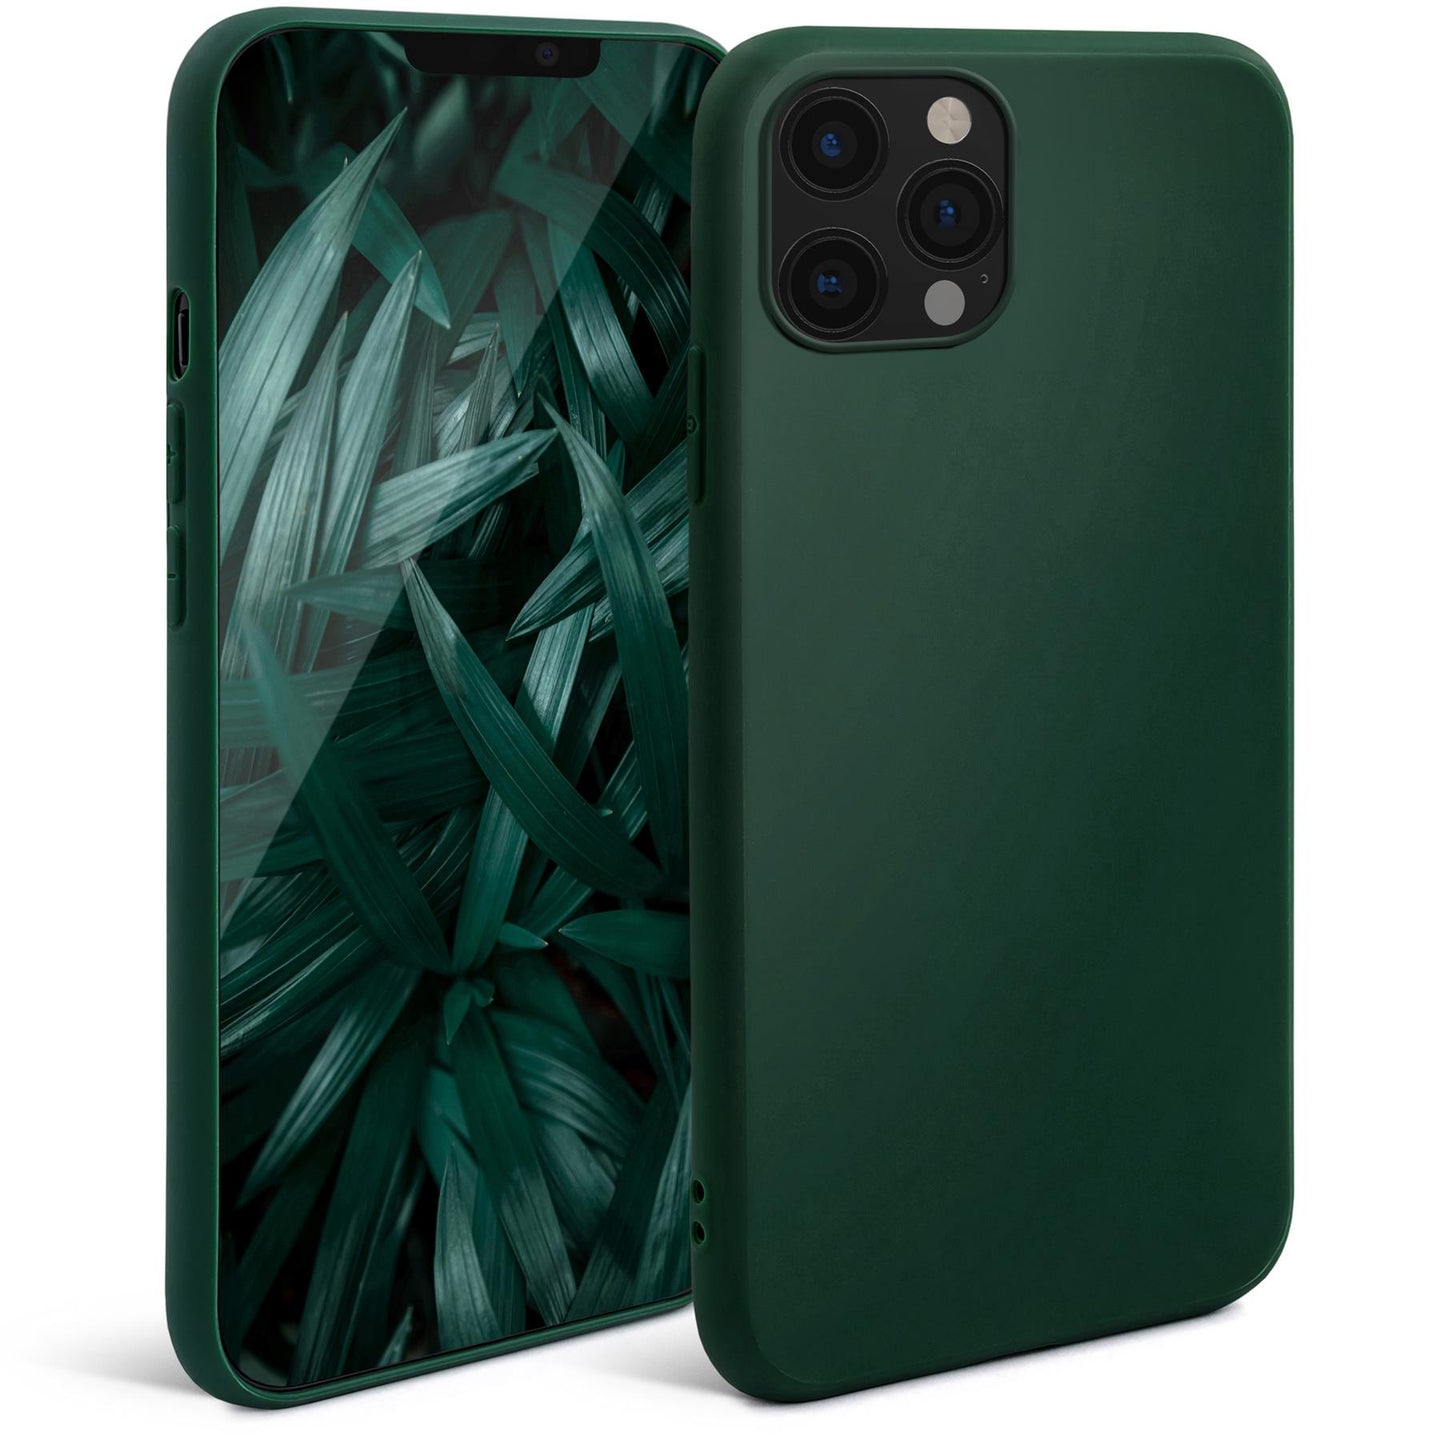 Moozy Minimalist Series Silicone Case for iPhone 12, iPhone 12 Pro, Midnight Green - Matte Finish Slim Soft TPU Cover